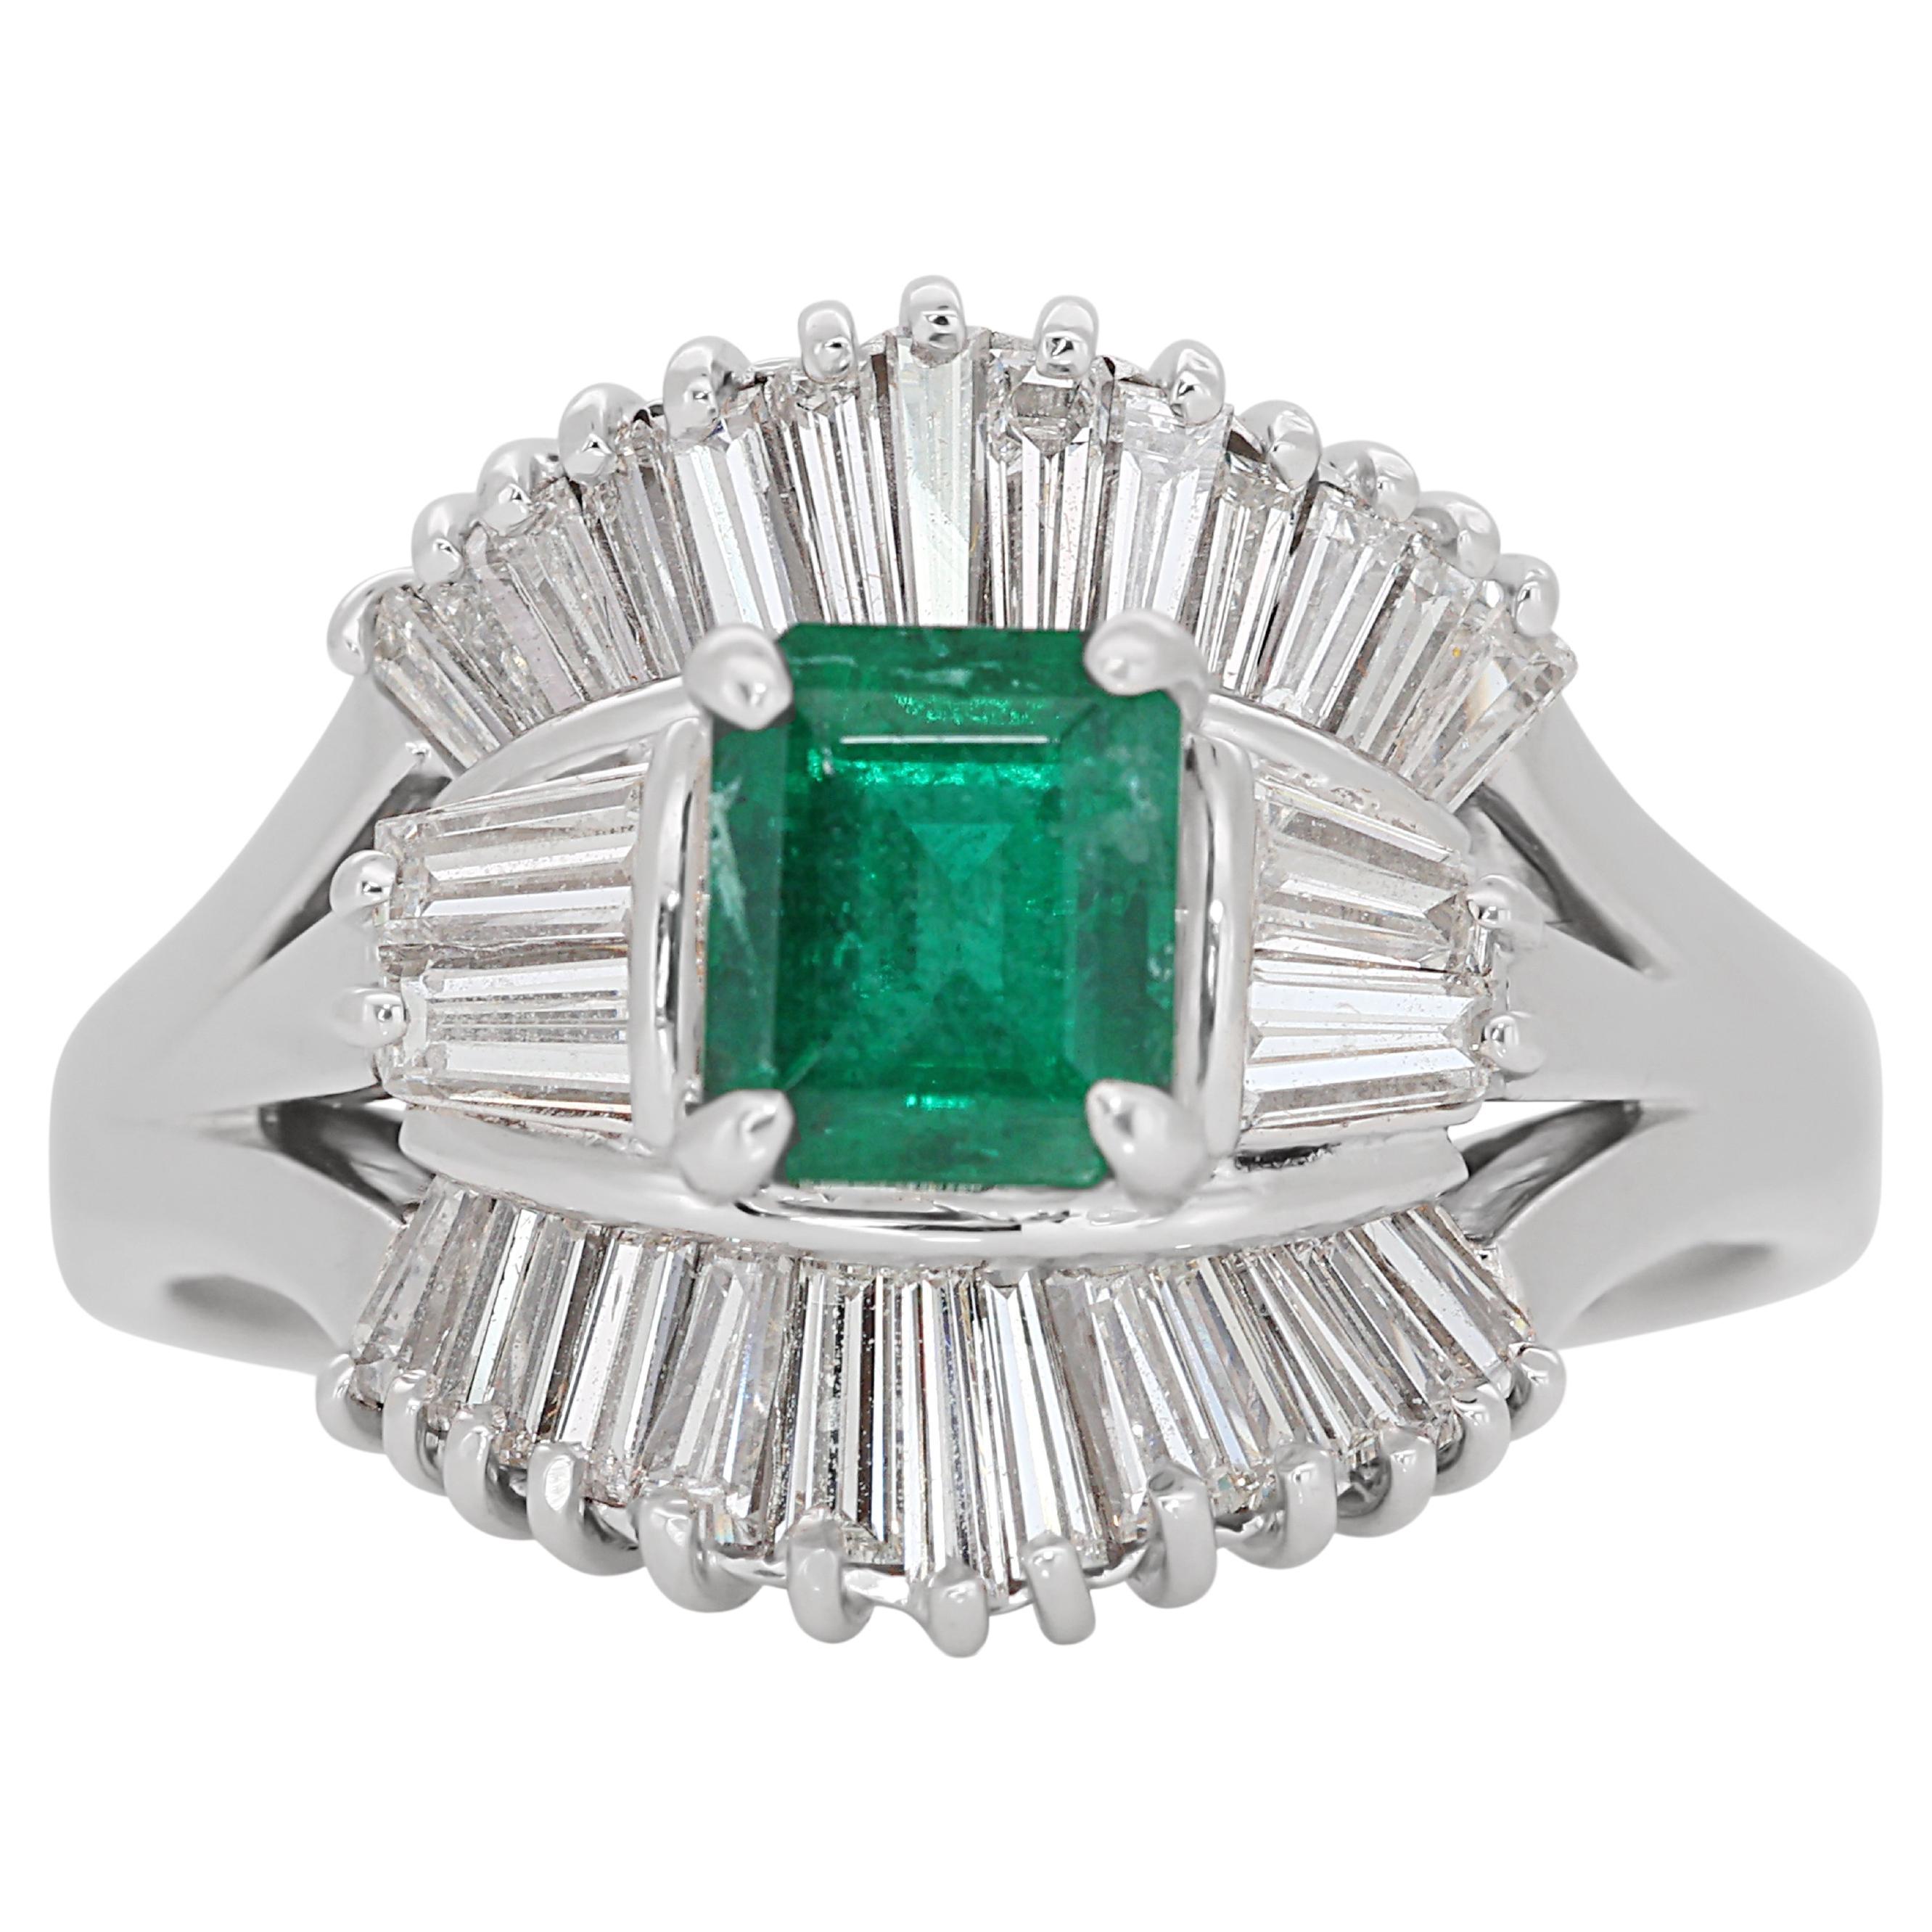 Stunning 2.08ct Emerald and Diamonds Halo Ring in 18k White Gold - IGI Certified For Sale